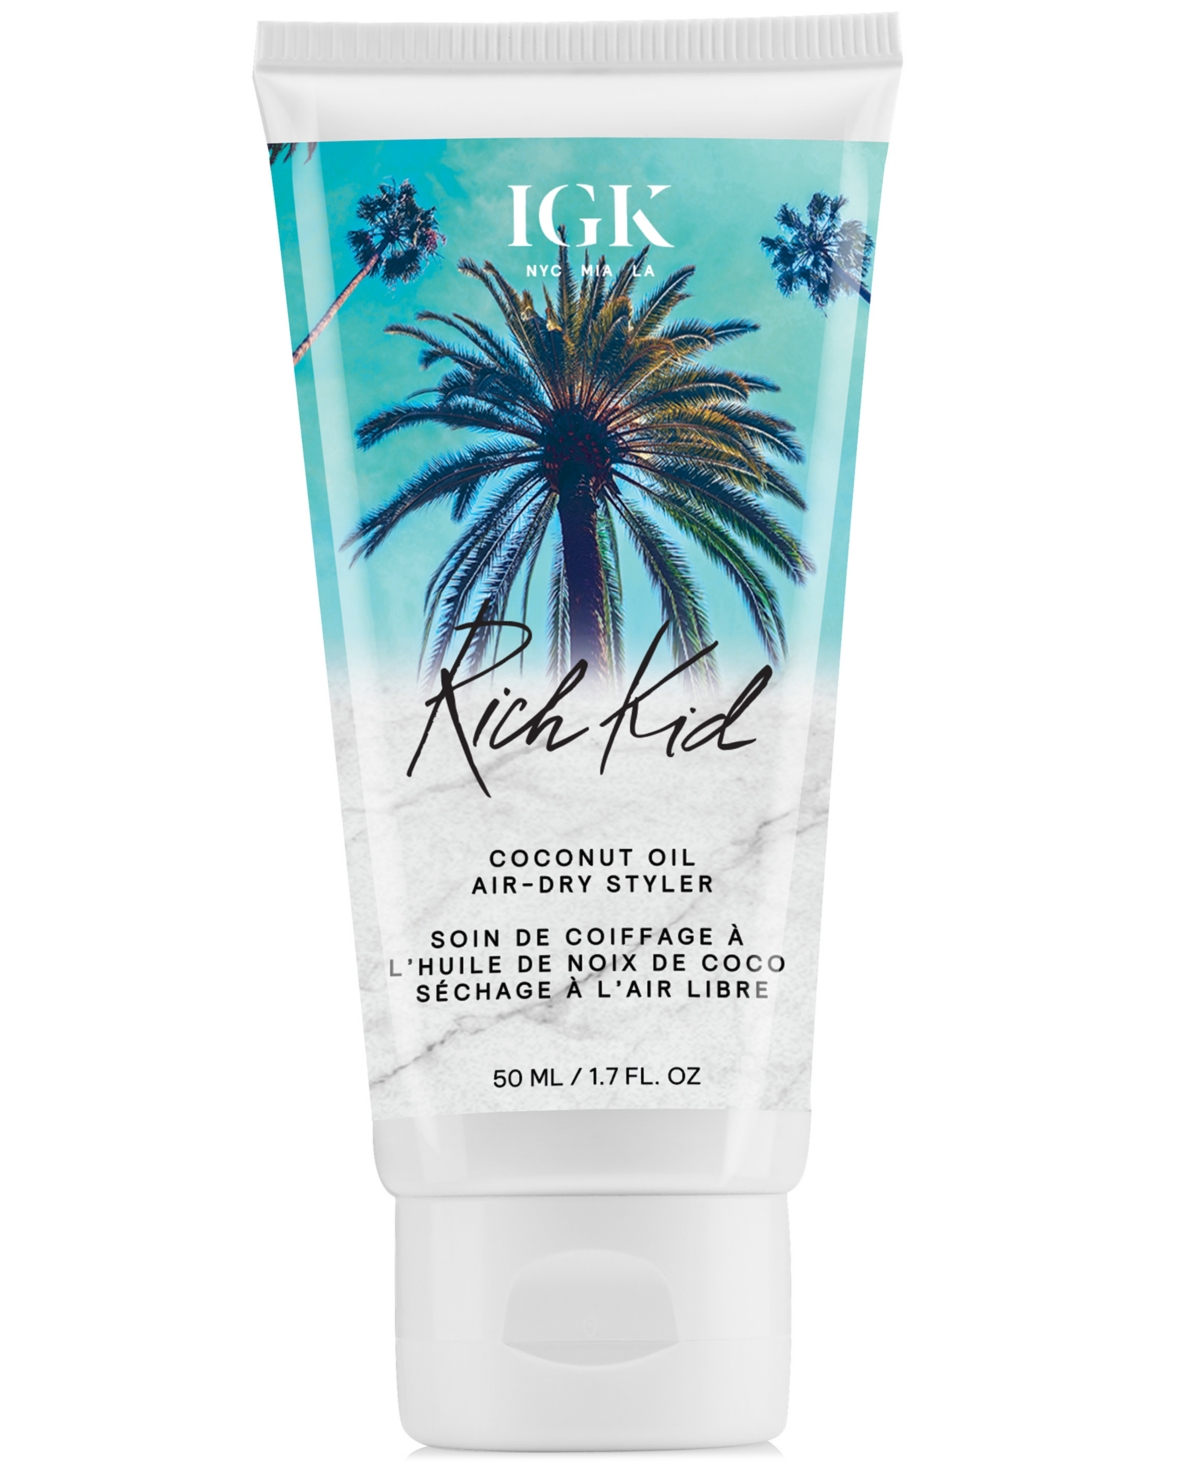 Igk Hair Rich Kid Coconut Oil Air-dry Styler - Travel Size In No Color